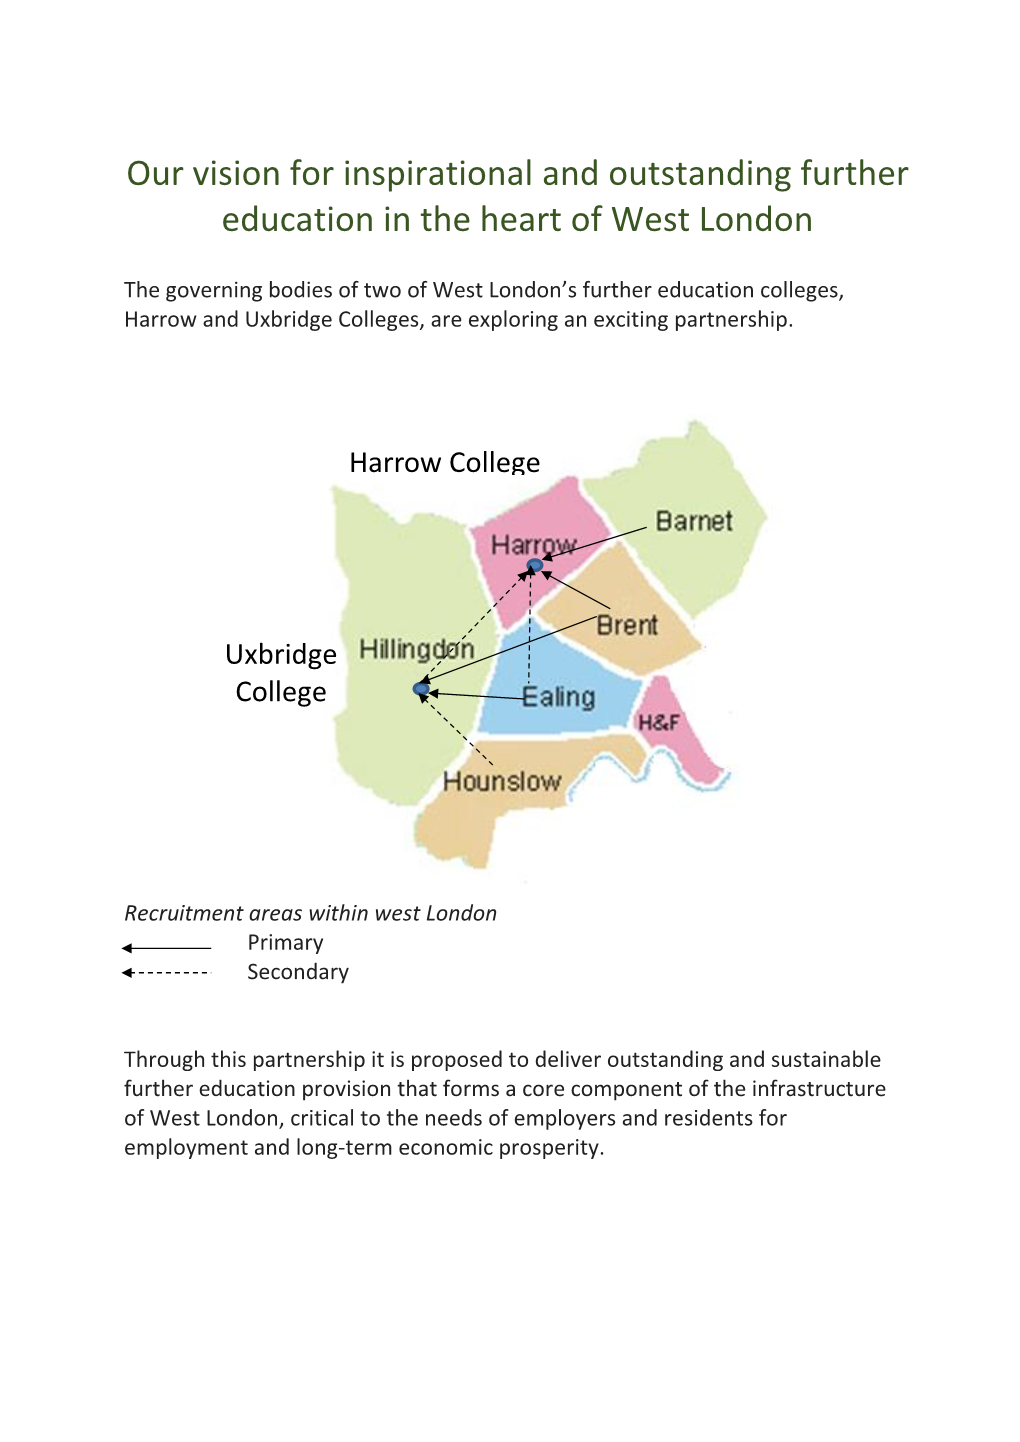 Our Vision for Inspirational and Outstanding Further Education in the Heart of West London